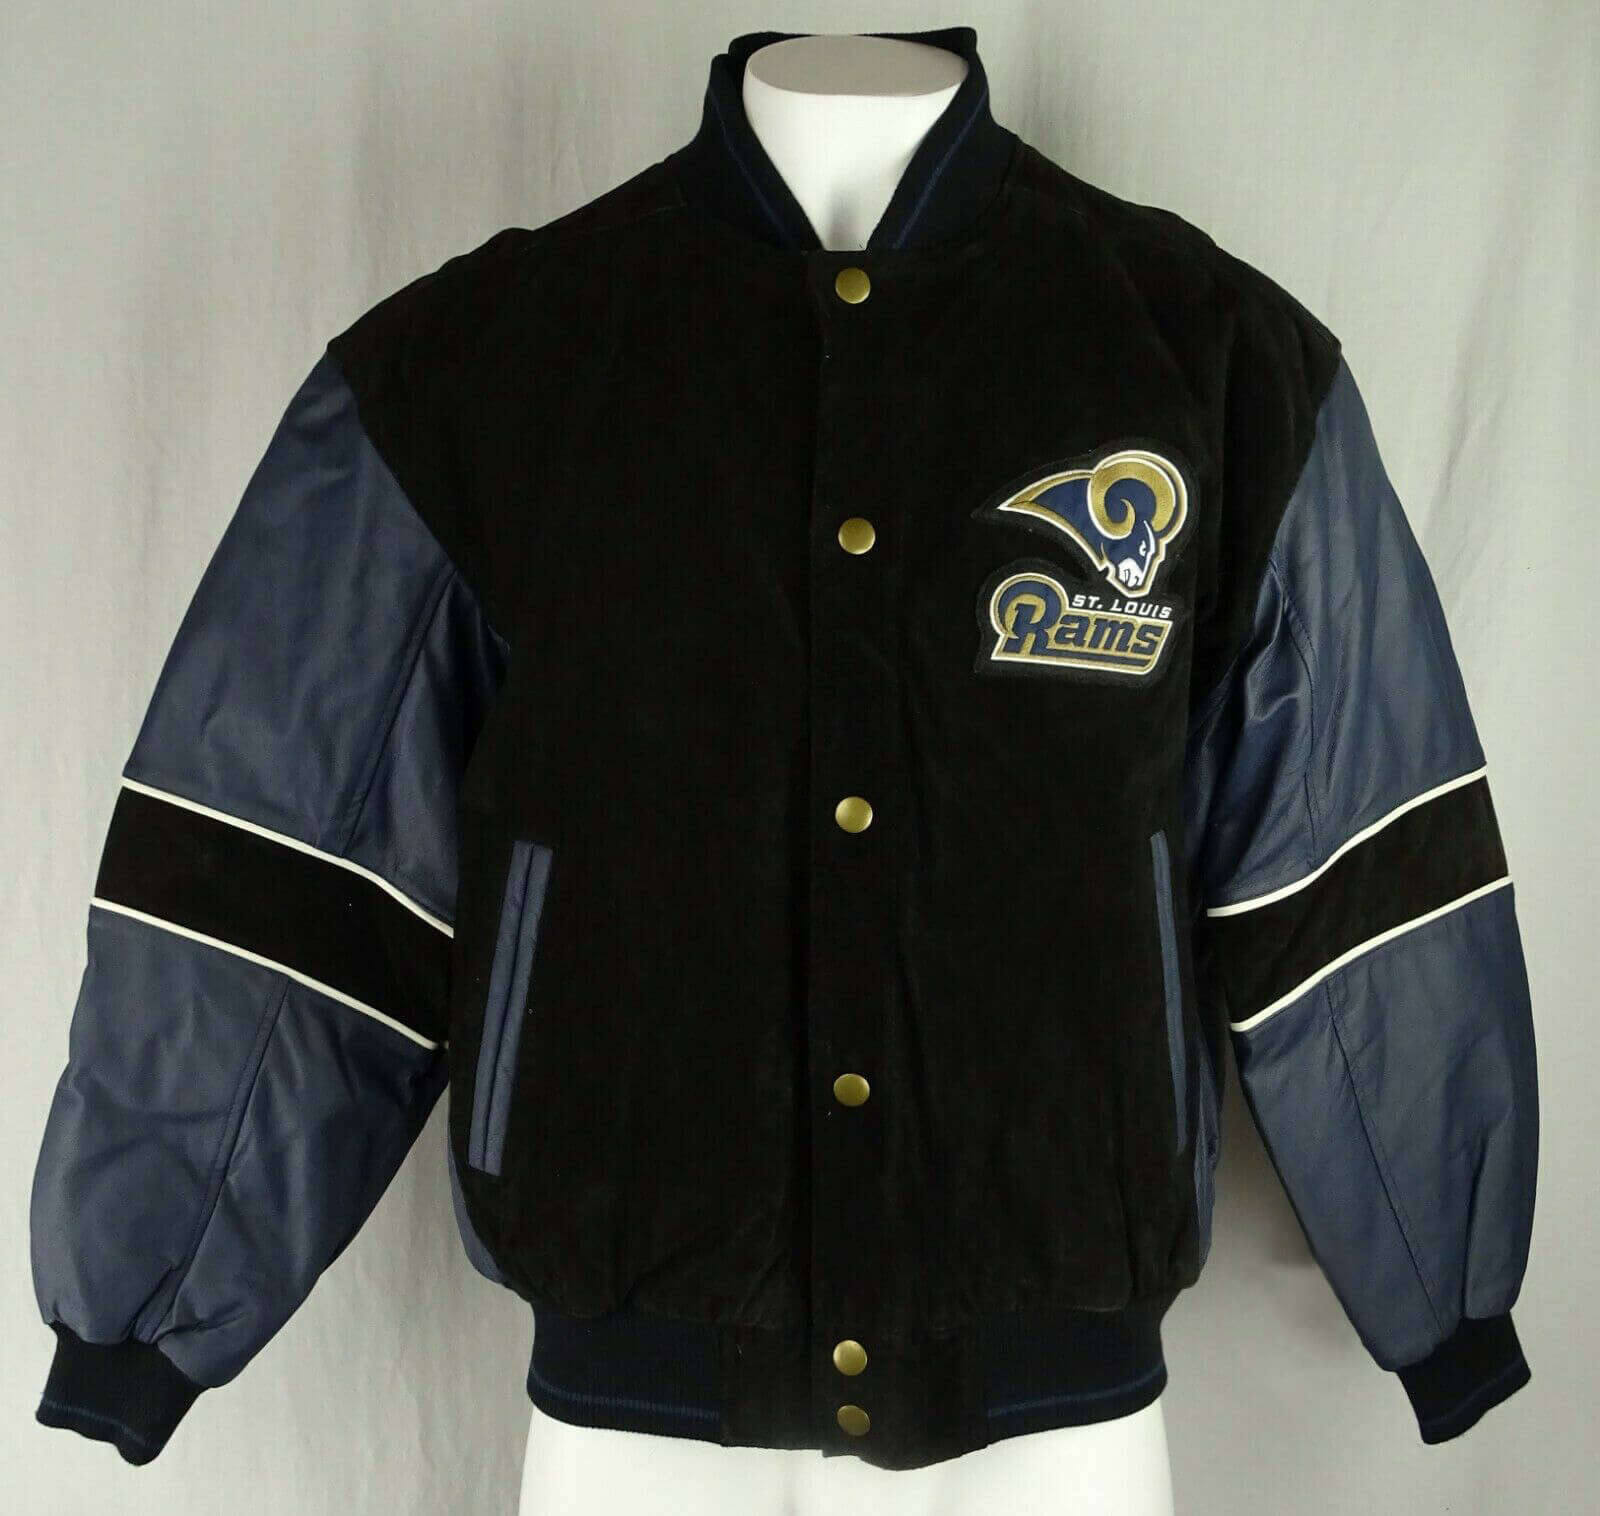 Authentic St. Louis Rams leather jacket.